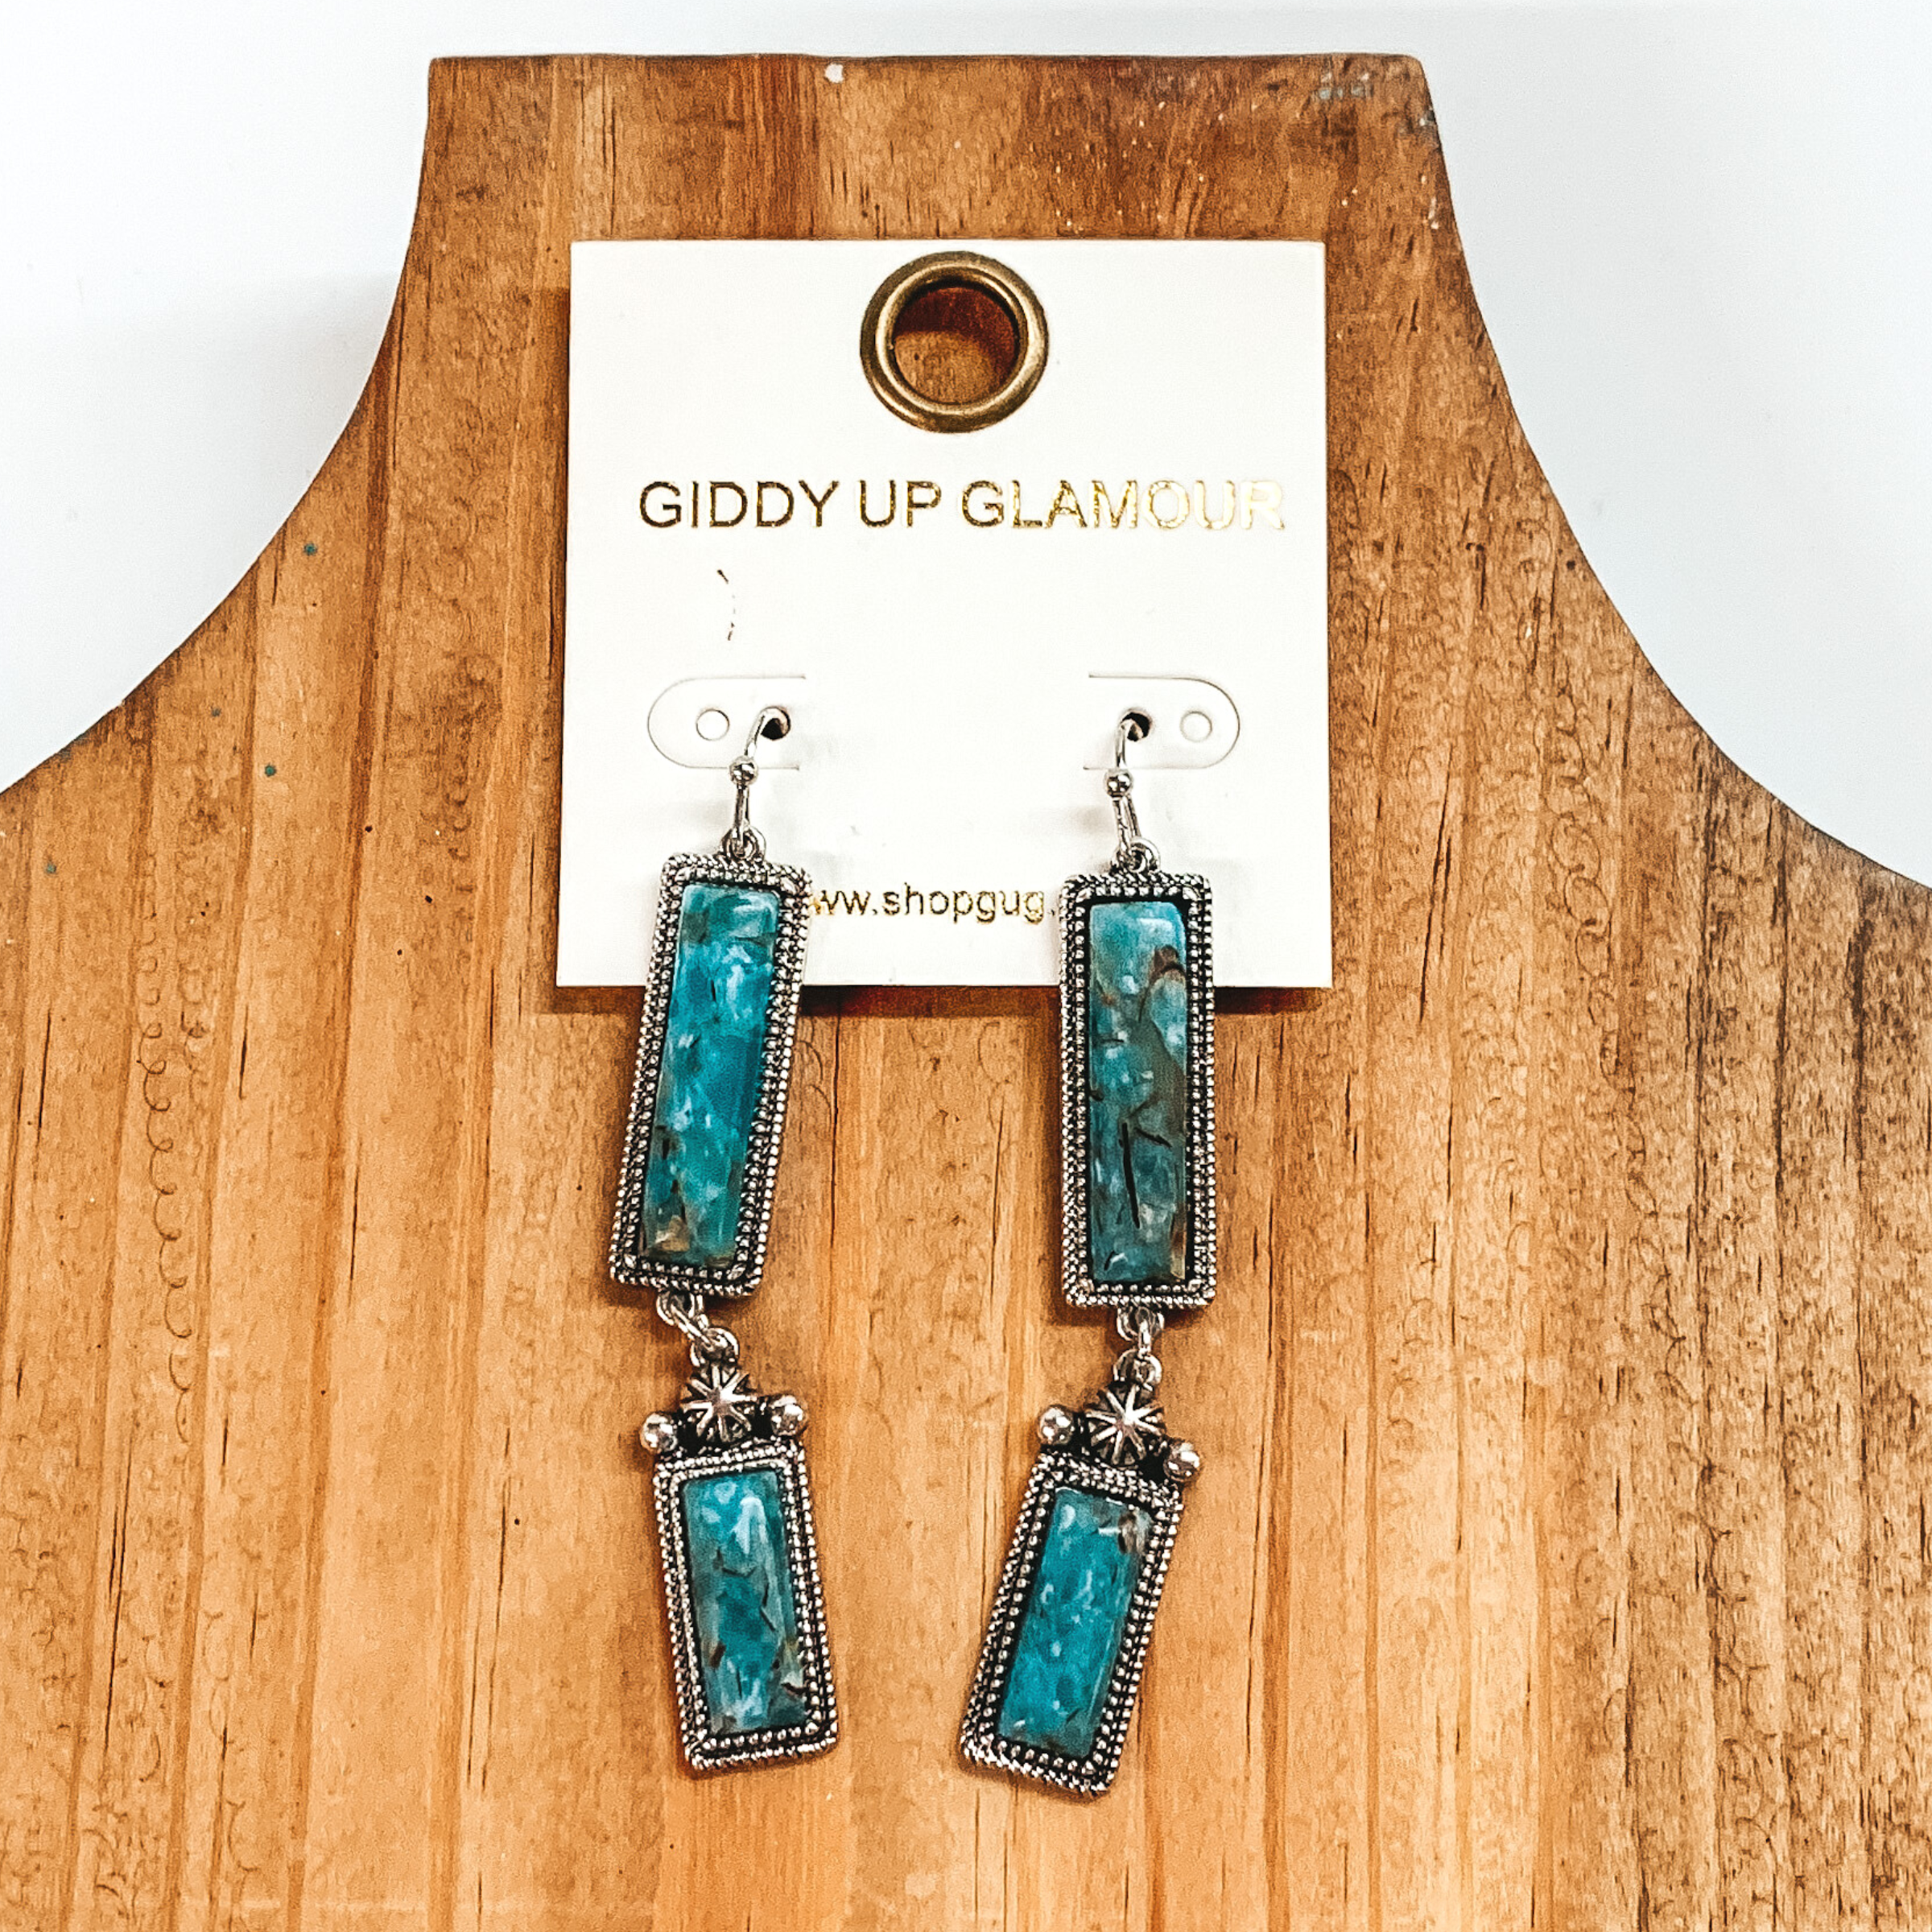 Two Rectangle Drop Earrings with Faux Turquoise Stones in Silver Tone - Giddy Up Glamour Boutique